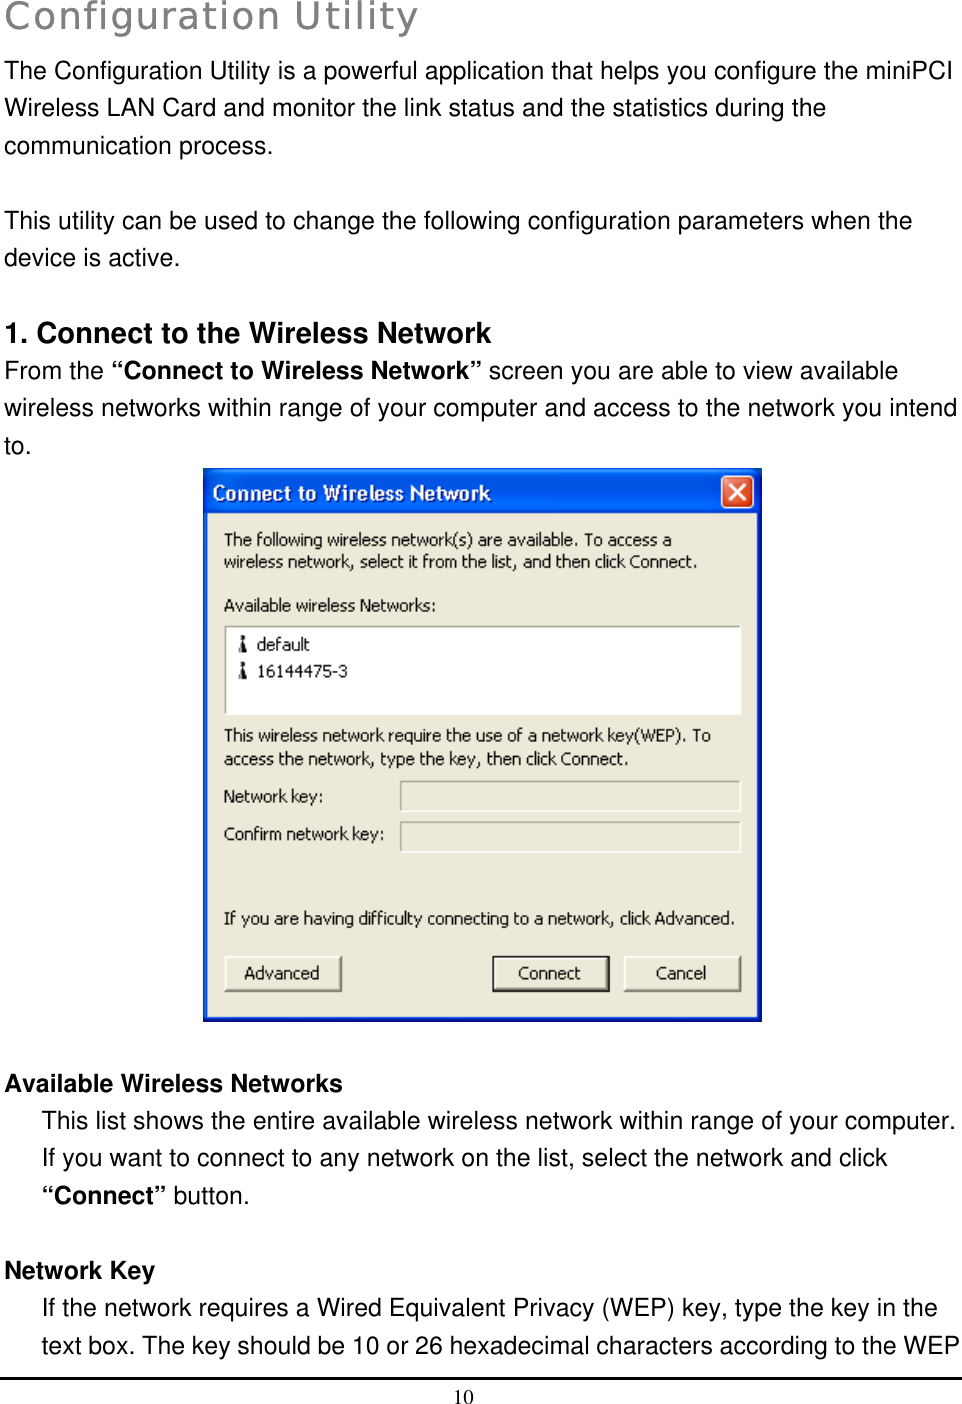   Configuration Utility The Configuration Utility is a powerful application that helps you configure the miniPCI Wireless LAN Card and monitor the link status and the statistics during the communication process.  This utility can be used to change the following configuration parameters when the device is active.  1. Connect to the Wireless Network From the “Connect to Wireless Network” screen you are able to view available wireless networks within range of your computer and access to the network you intend to.   Available Wireless Networks This list shows the entire available wireless network within range of your computer. If you want to connect to any network on the list, select the network and click “Connect” button.  Network Key If the network requires a Wired Equivalent Privacy (WEP) key, type the key in the text box. The key should be 10 or 26 hexadecimal characters according to the WEP 10  